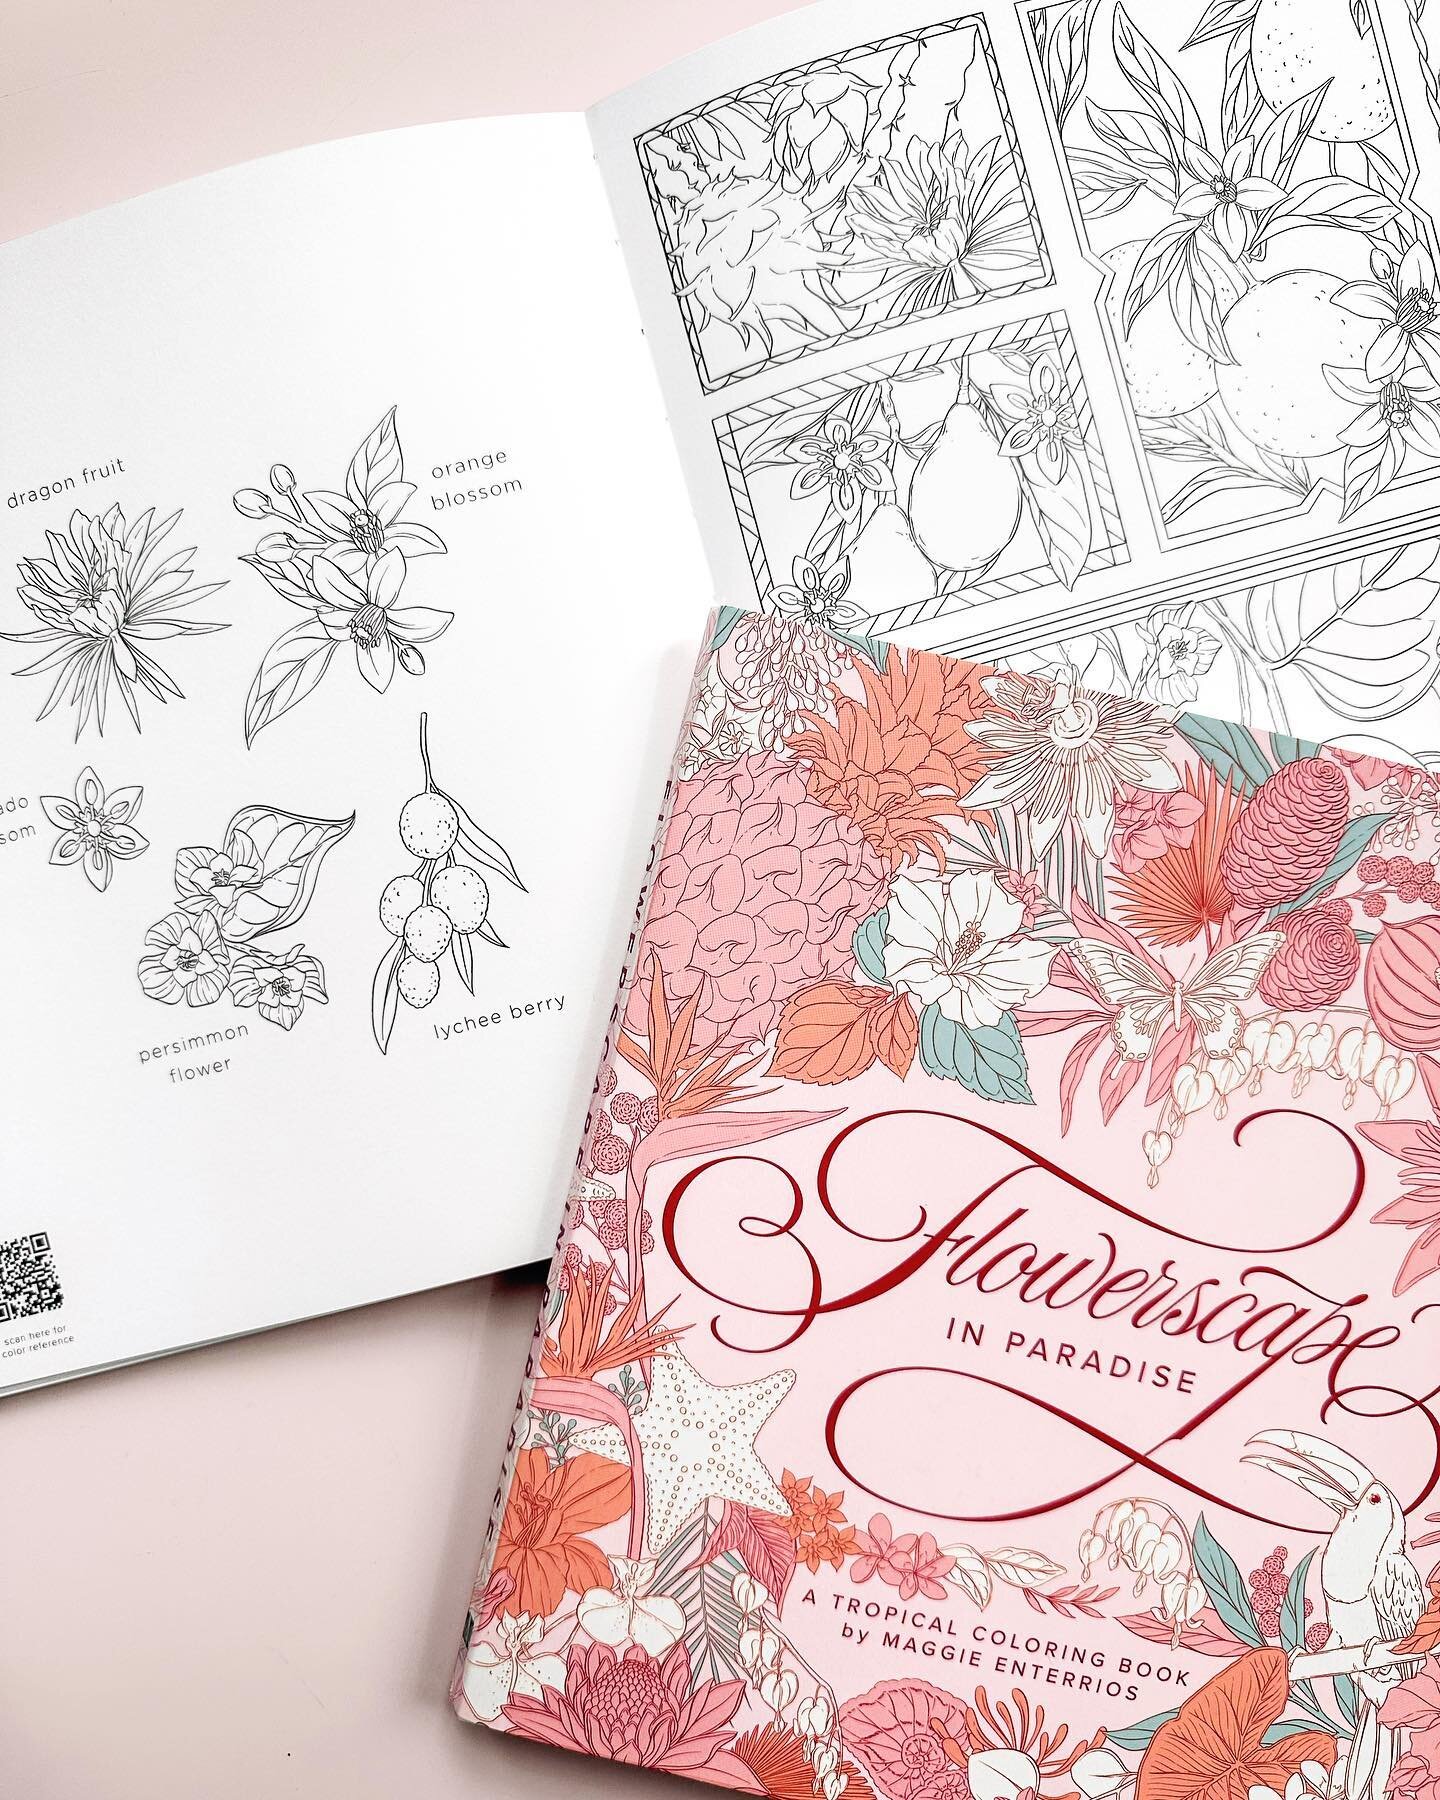 Flowerscape in Paradise comes out in less than 2 weeks! I just received all my authors copies so of course I had to sneak a few shots of some inside pages, including the new style of flower references! Are you EXCITED?!

#coloringbook #coloring #colo